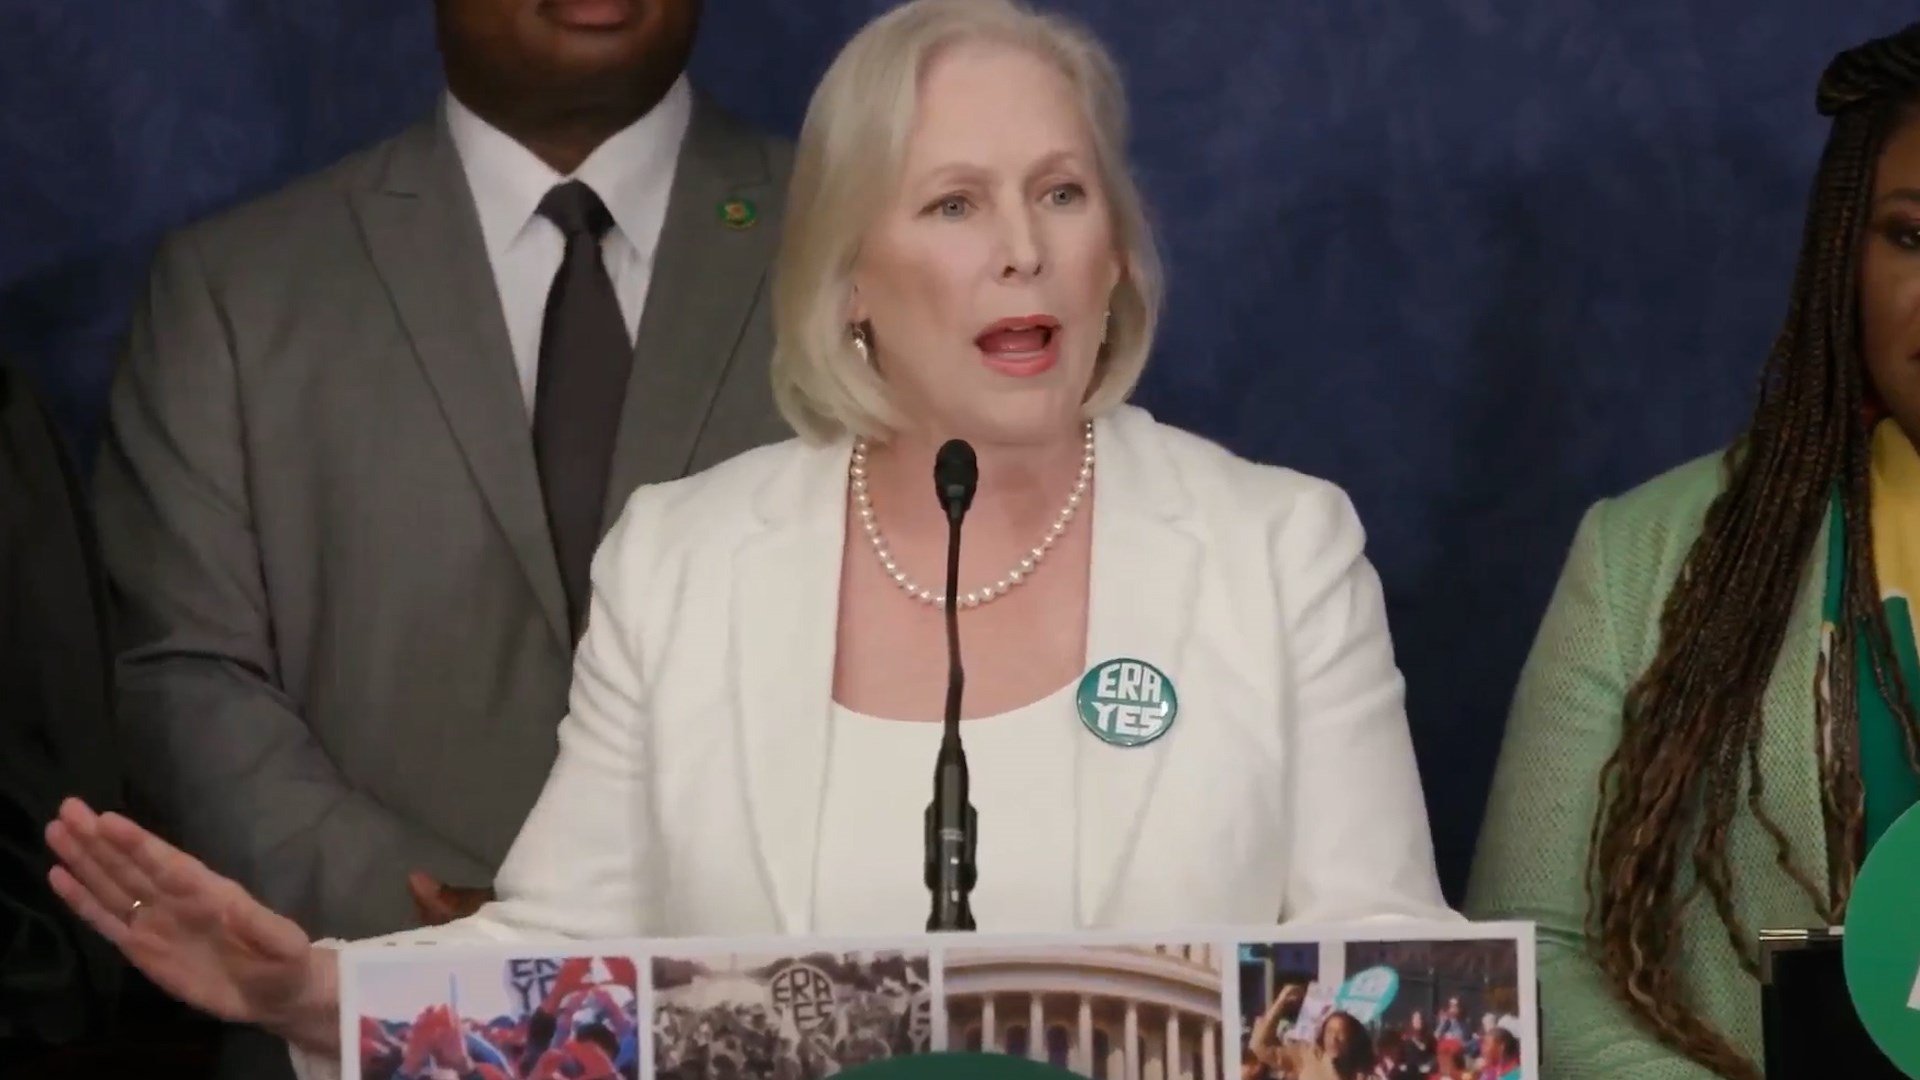 Congressional Democrats Push to Finalize Equal Rights Amendment into Constitution